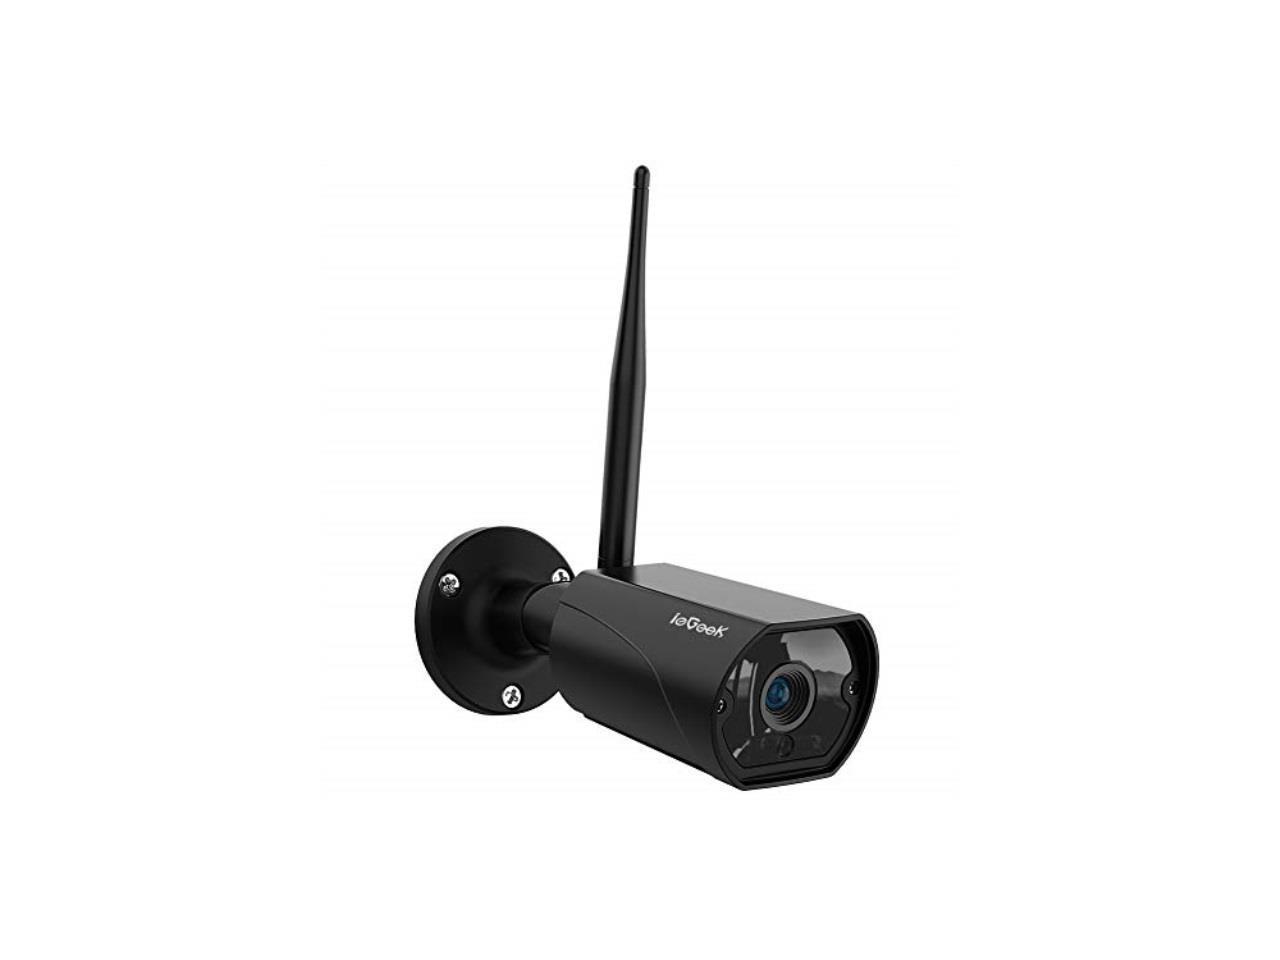 smoke Economy Talk iegeek outdoor security camera 1080p,bullet surveillance wifi ip camera  cctv camera system with twoway audio,stronger wifi signal,25m ir night  vision,smart motion detection,remote viewios,android,pc - Newegg.com